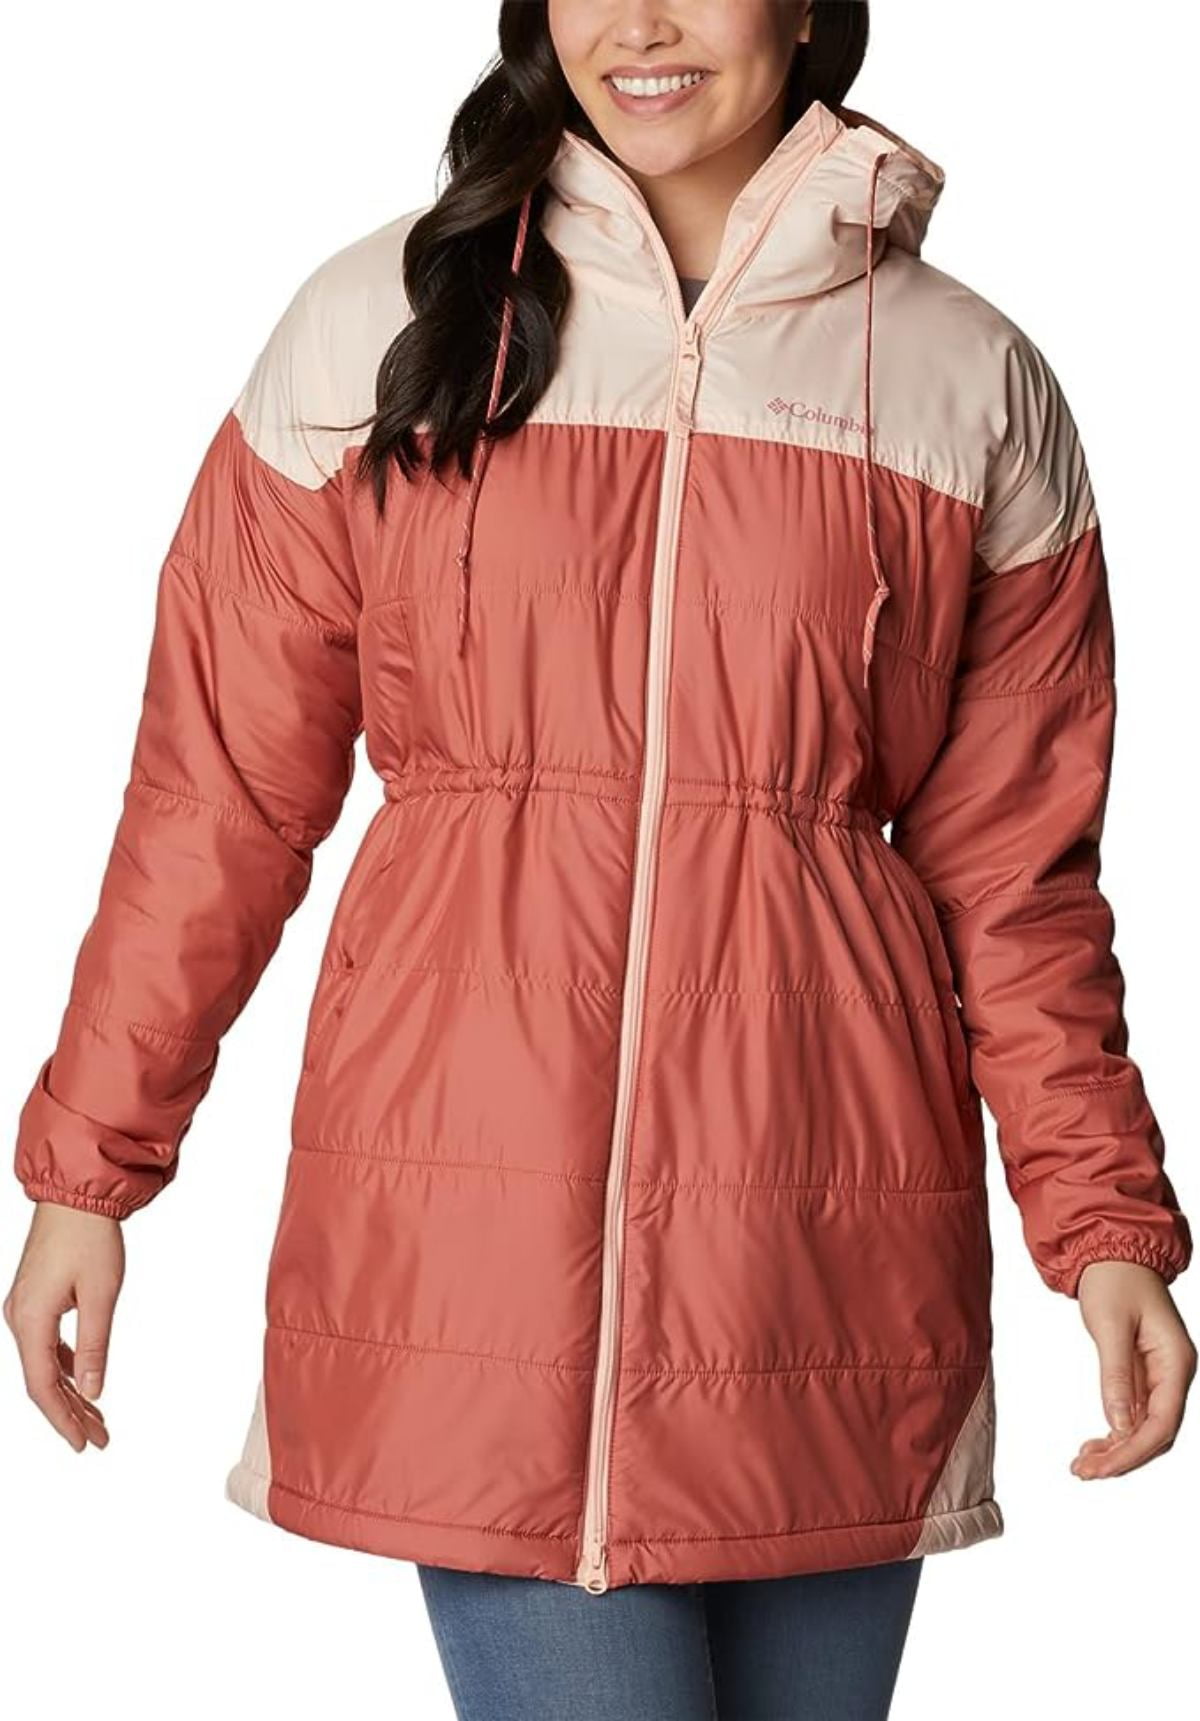 Flash Long Women\'s Blossom, Dark Jacket, Coral/Peach XX-Large Sherpa Columbia Lined Challenger